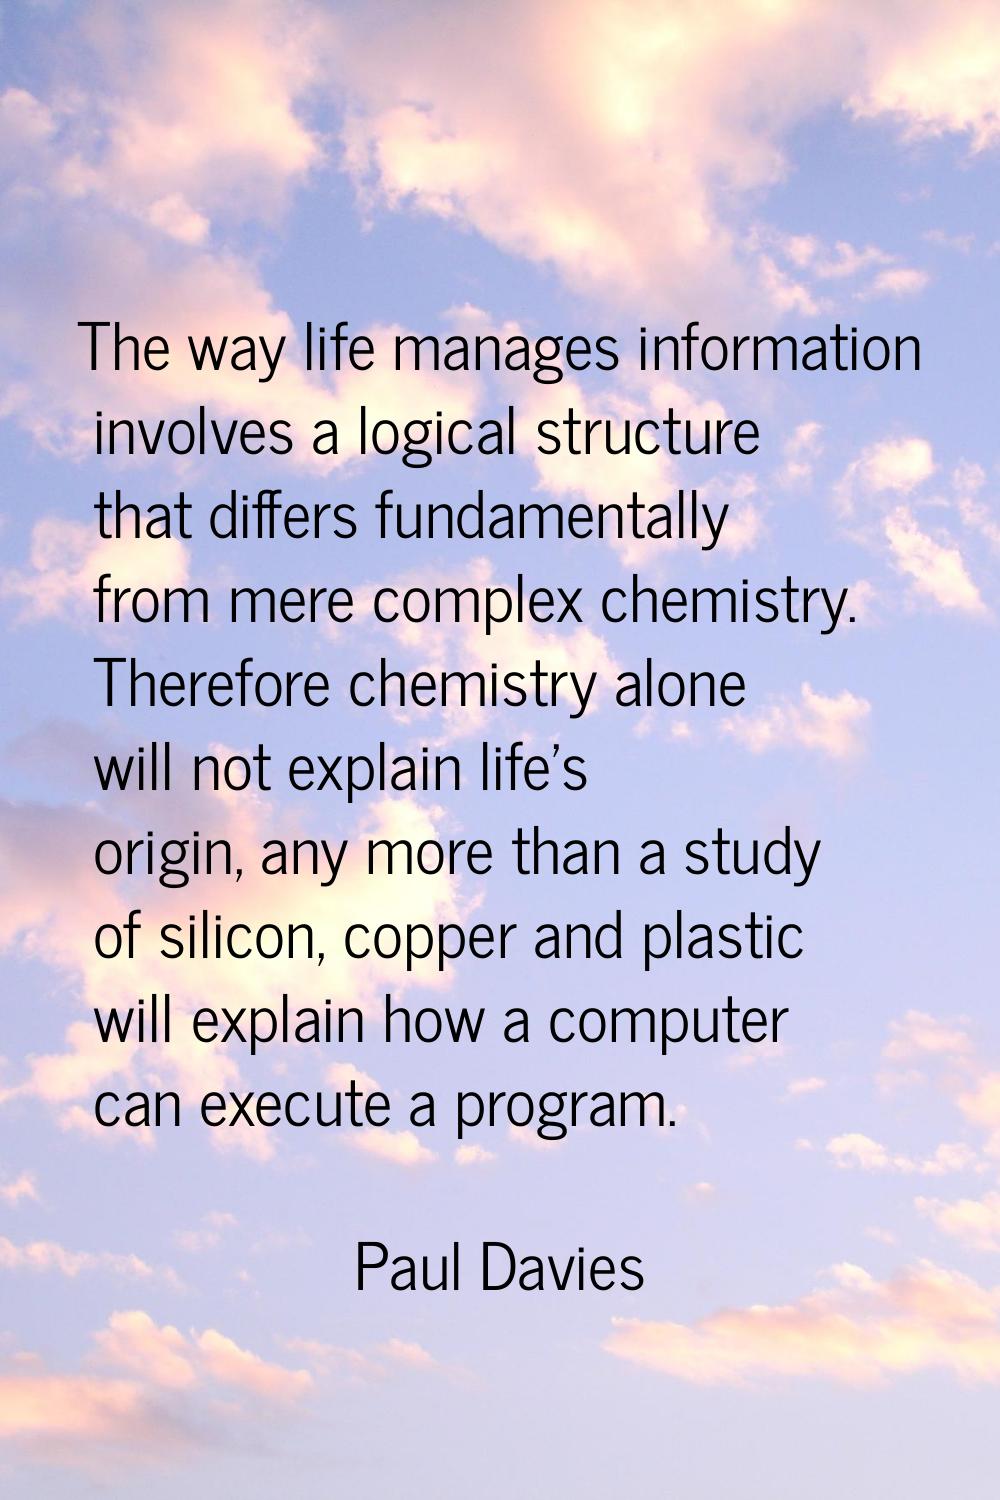 The way life manages information involves a logical structure that differs fundamentally from mere 